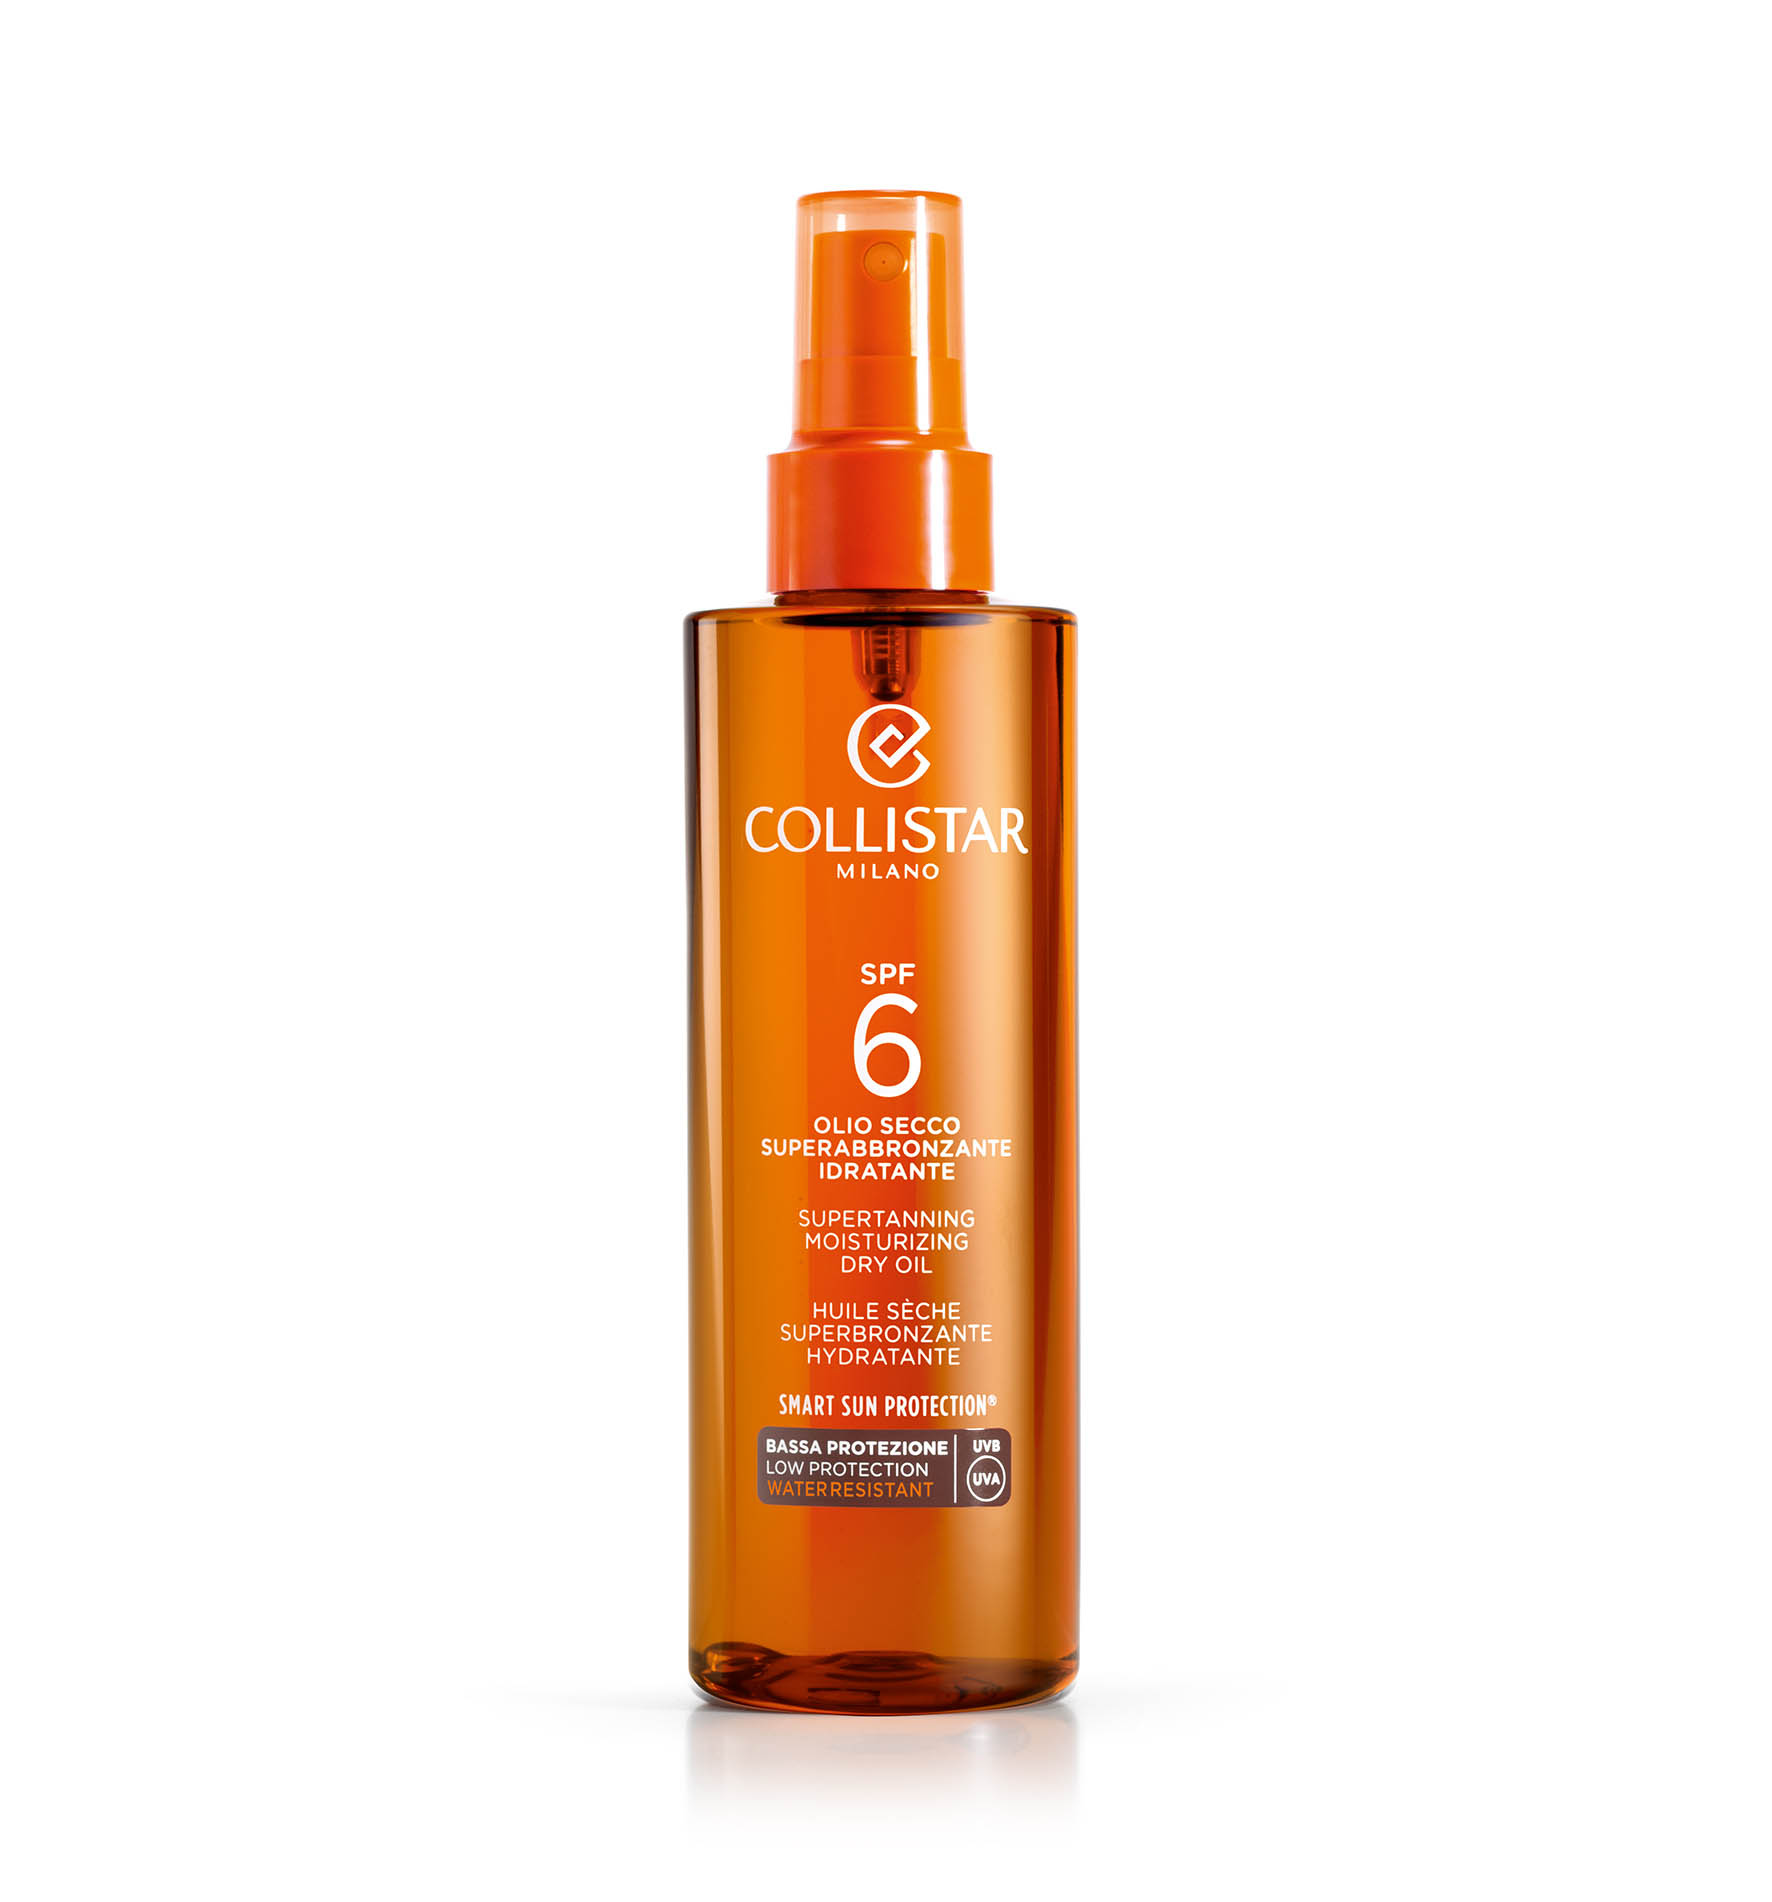 SUPERTANNING DRY OIL SPF 6 - Tanning oil | Collistar - Shop Online Ufficiale